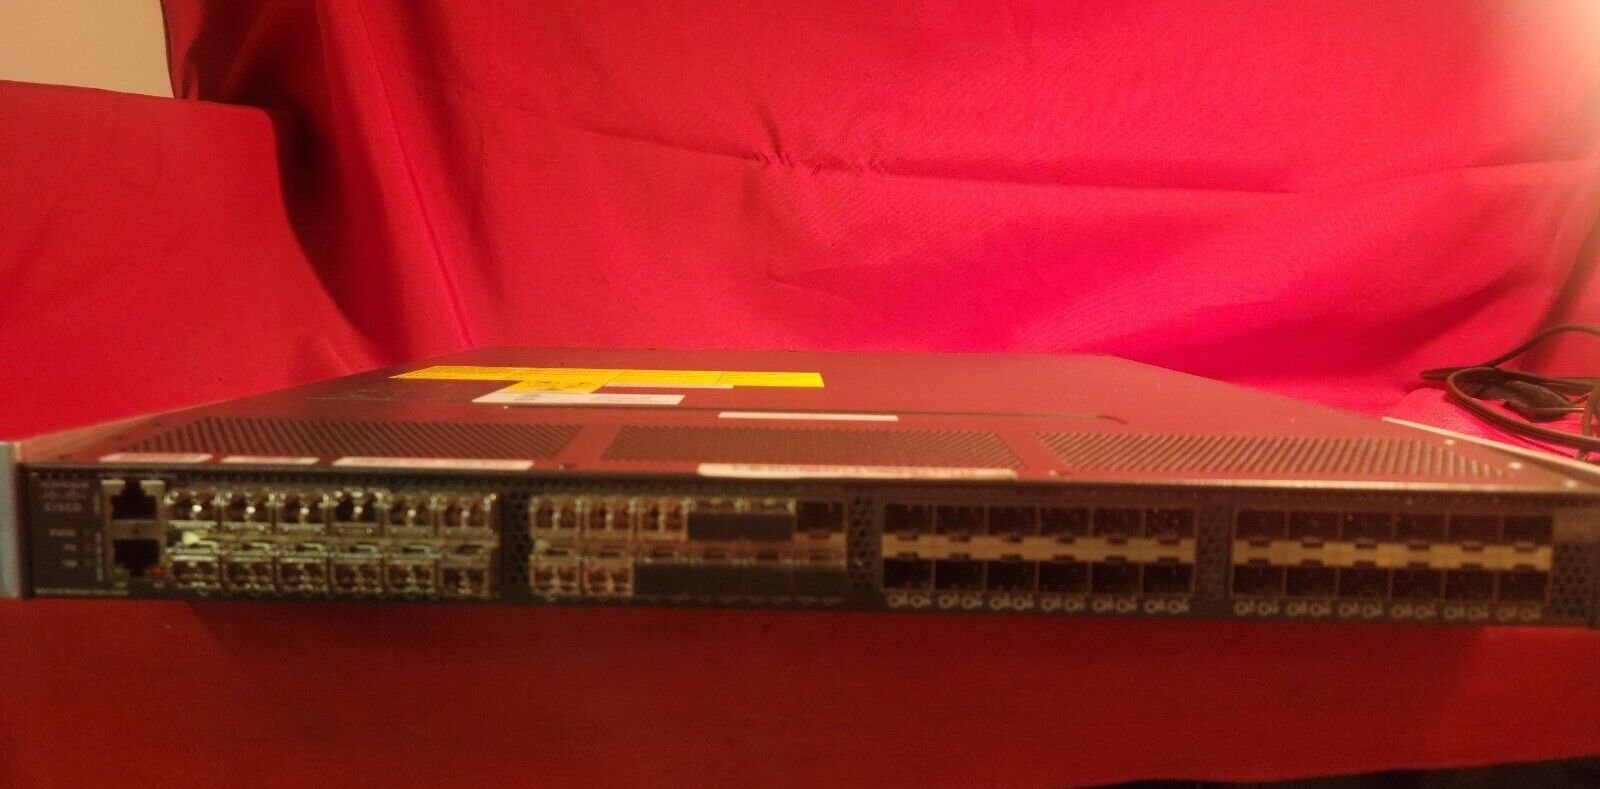 Cisco DS-C9148-16P-K9 48 Port Switch MDS 9148 Multilayer Fabric used